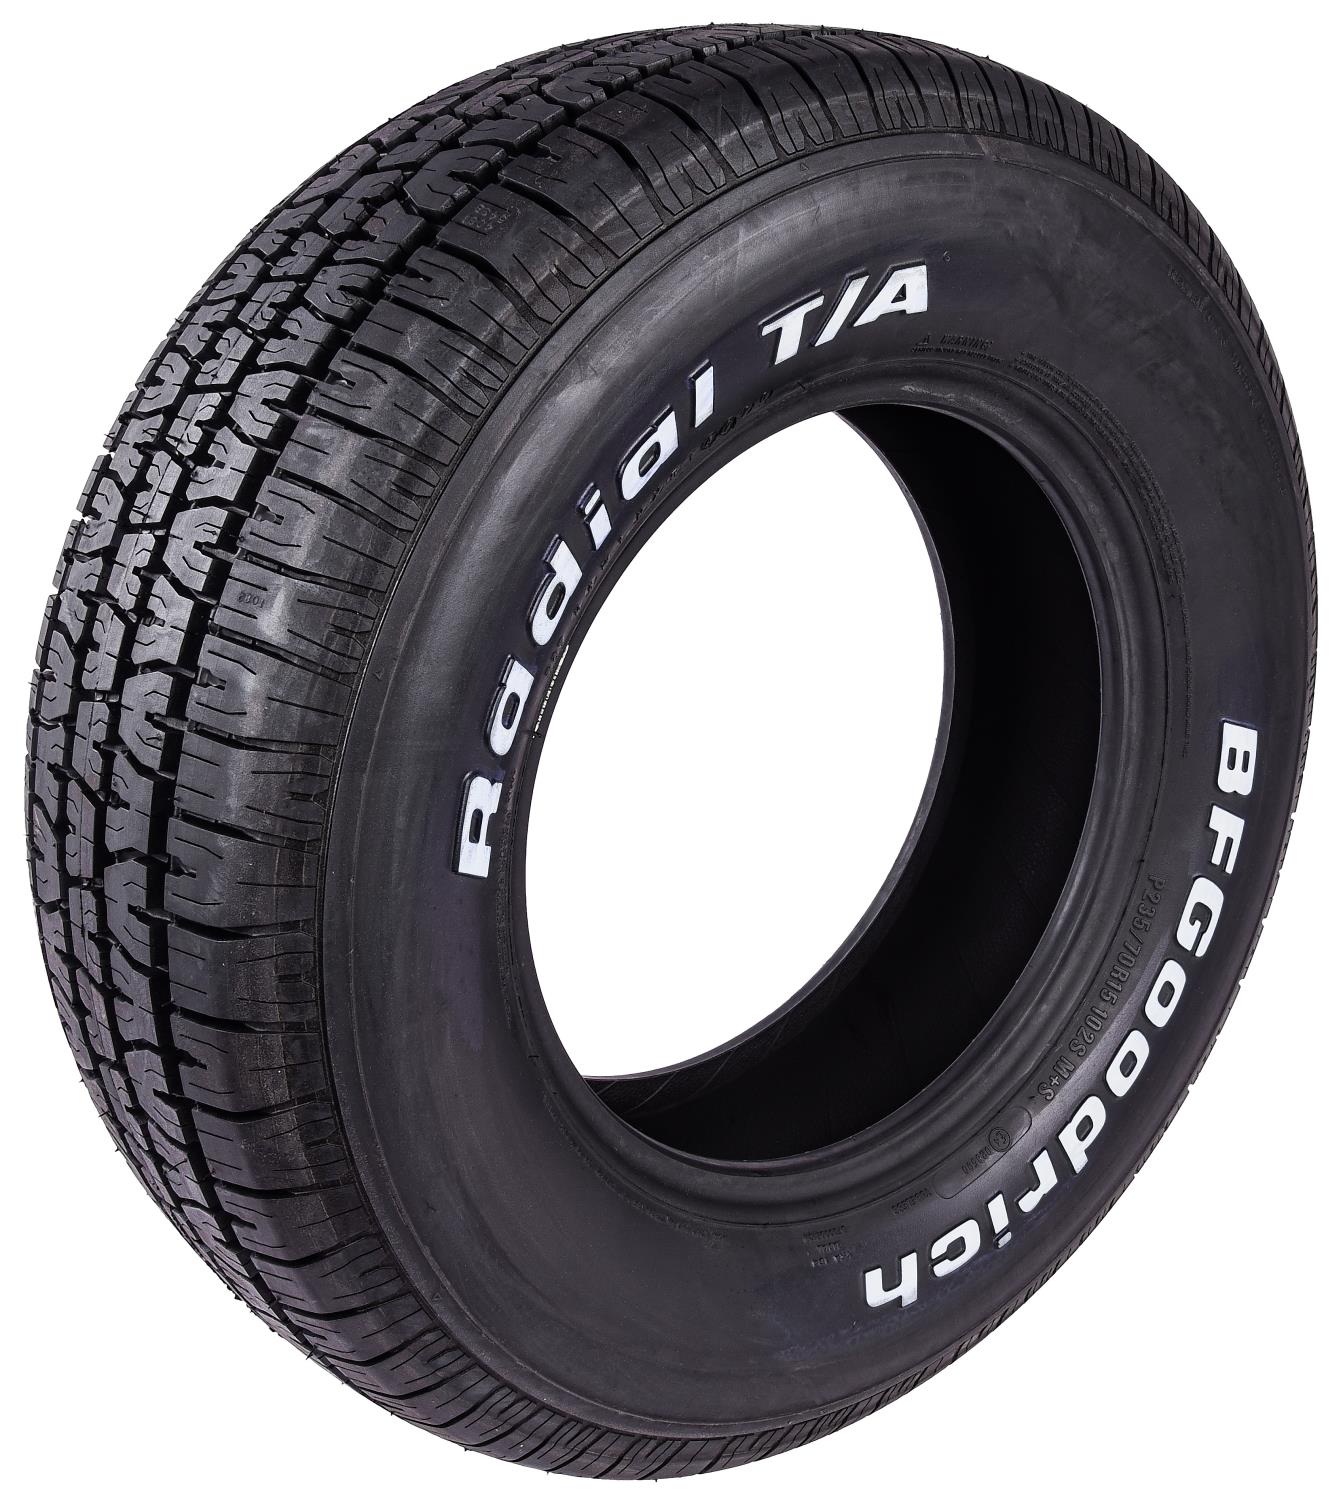 Radial T/A Tire P235/70R15